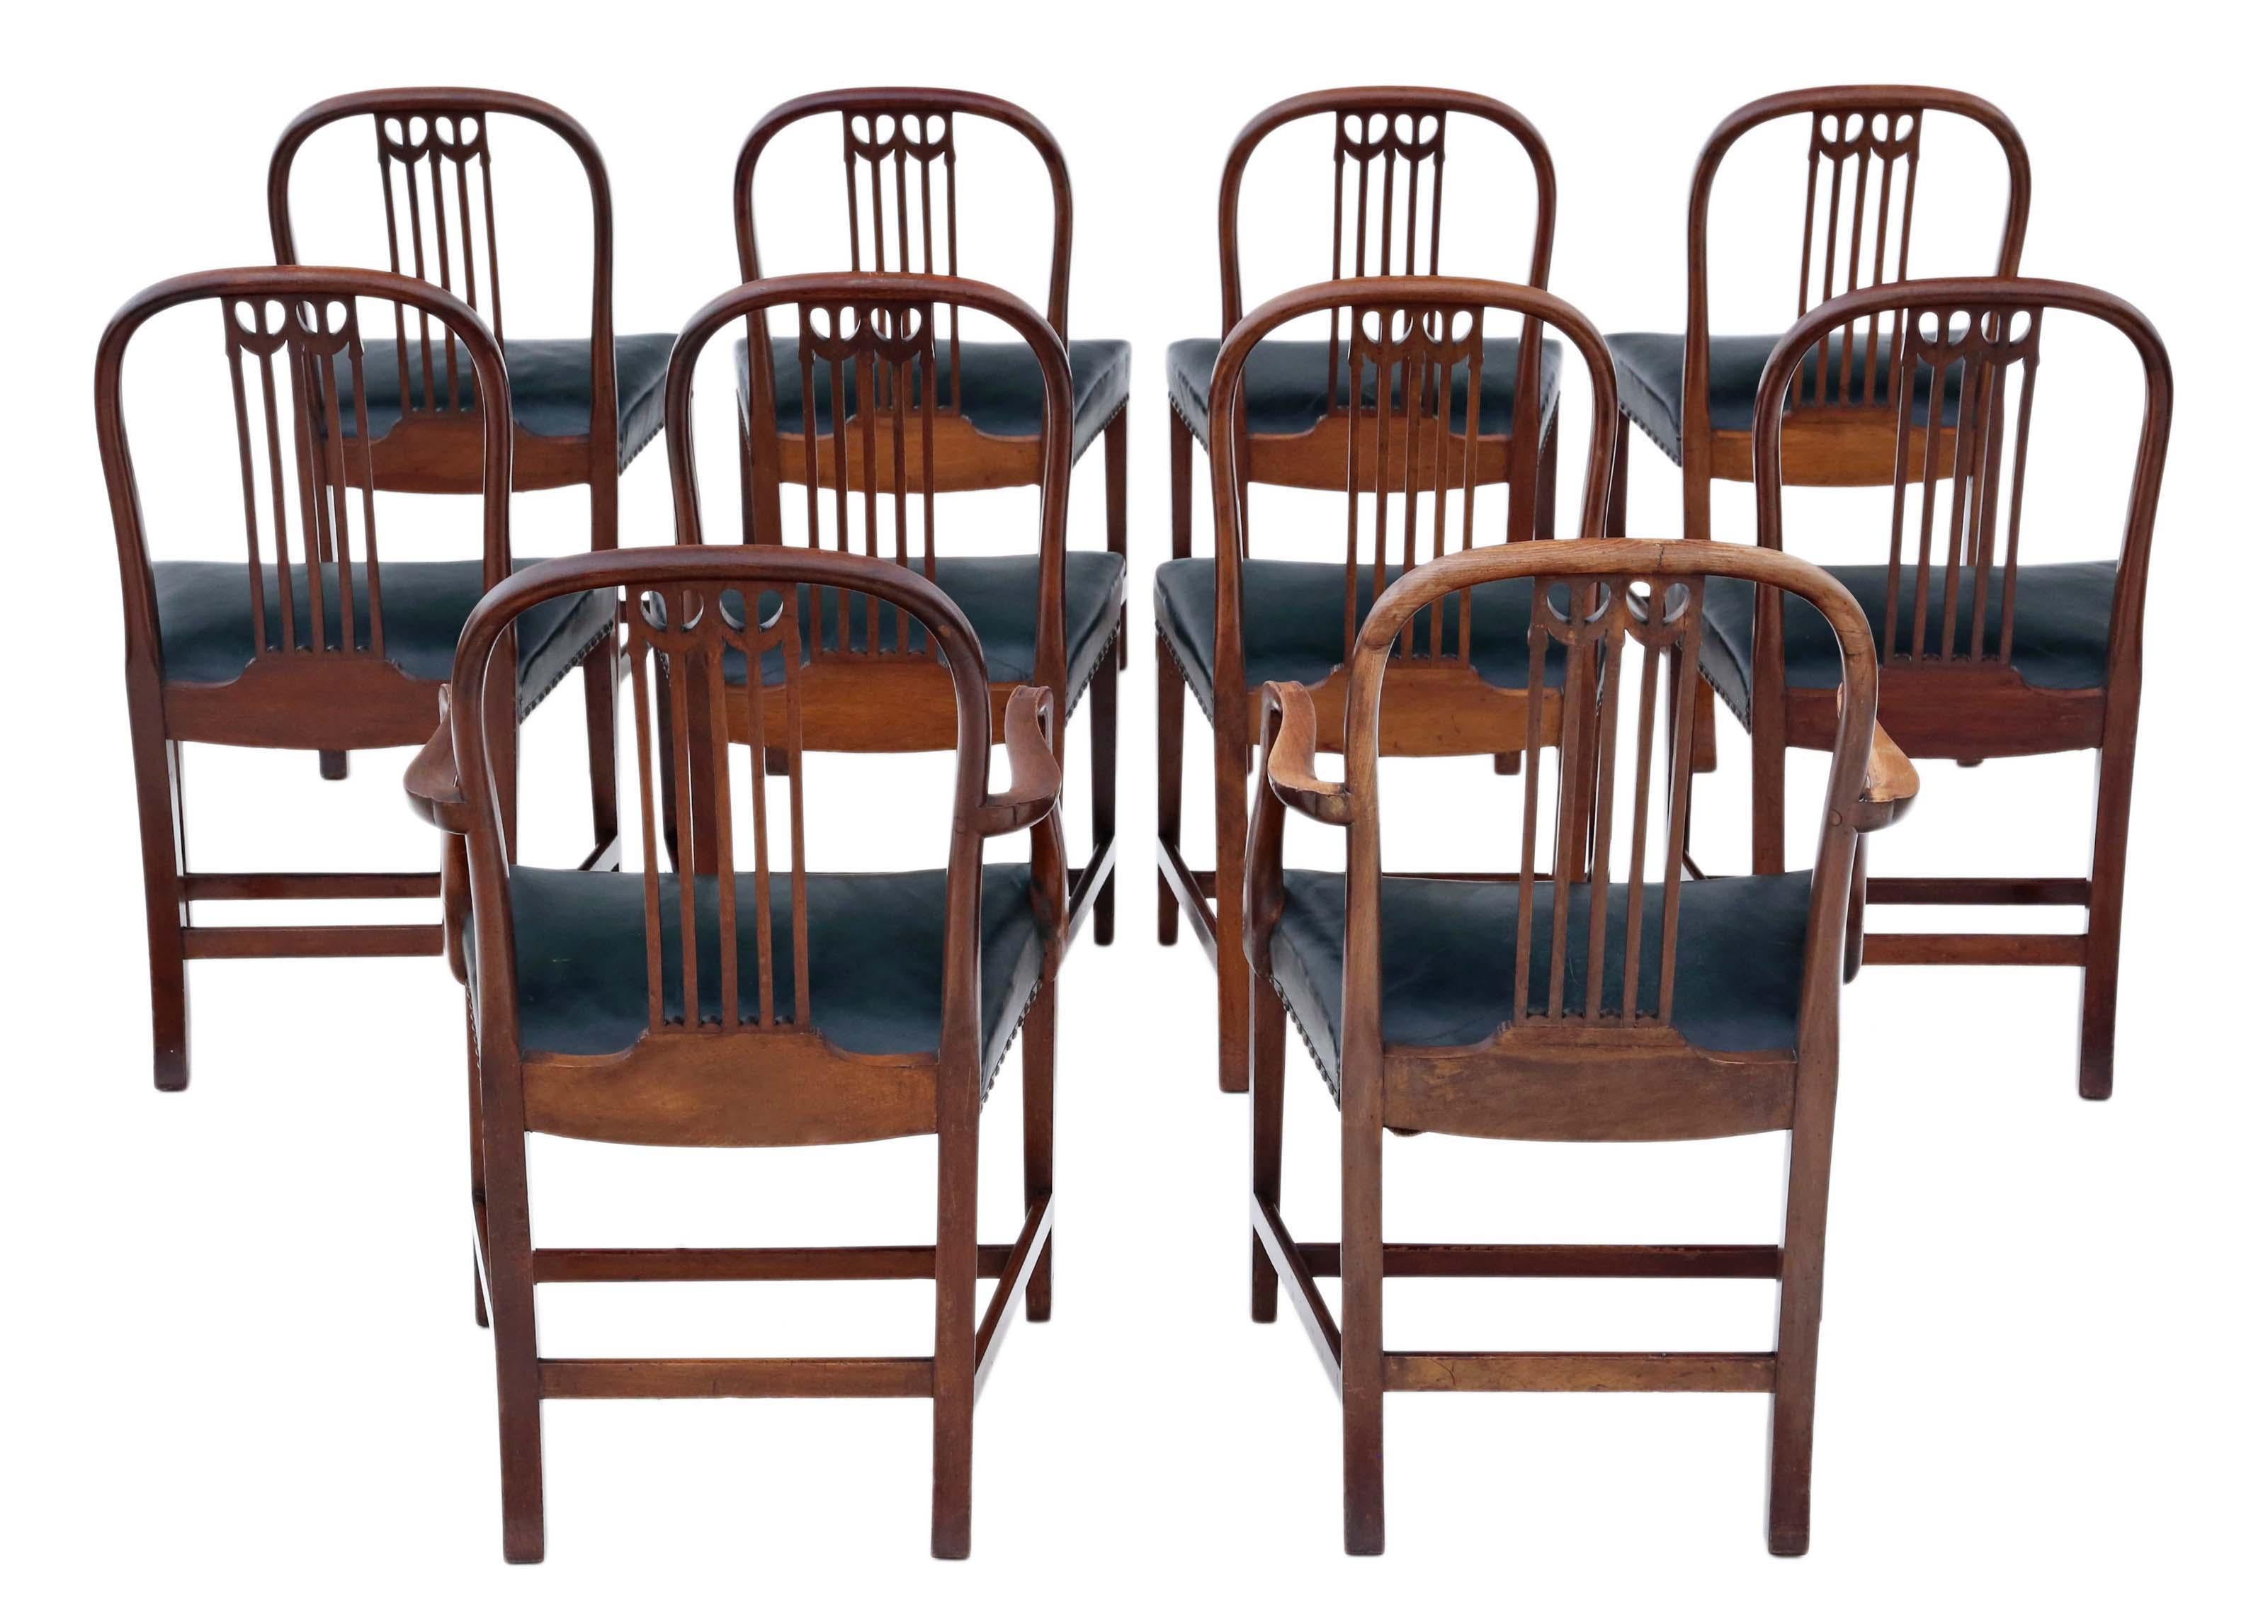 Antique quality set of 10 (8+2) mahogany dining chairs, 19th century. The very best color and patina. Very rare!

Solid with no loose joints and no woodworm. Lovely elegant design.

The green leather seats are in good condition (some minor